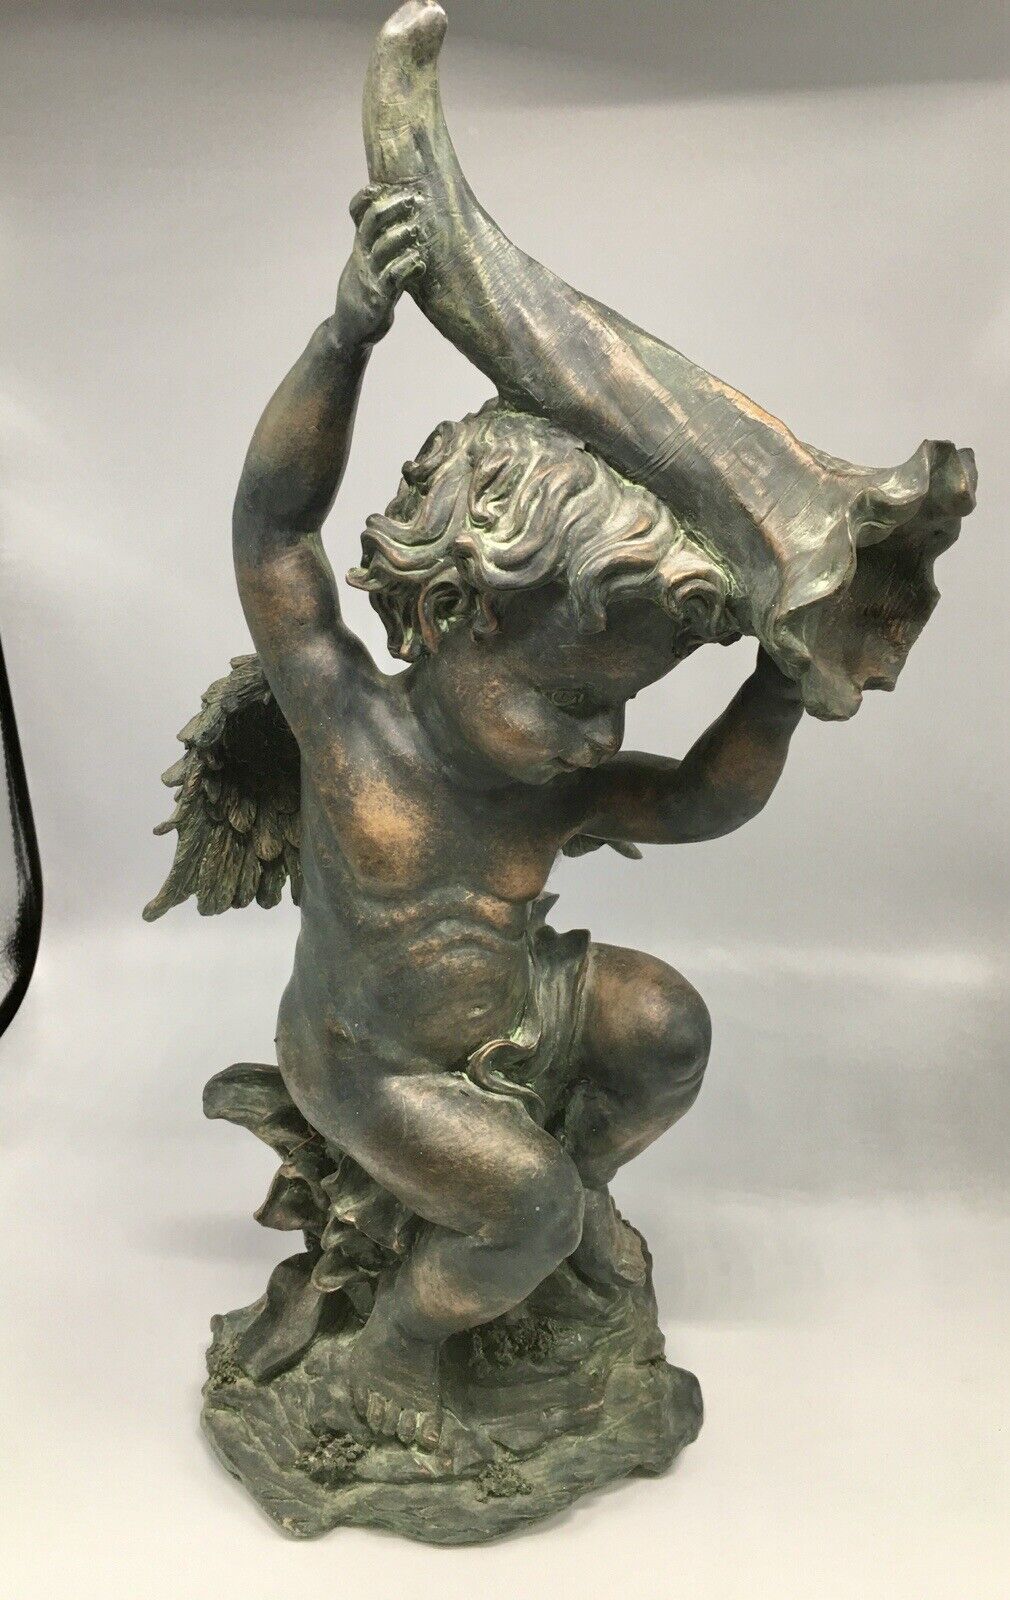 VTG Hand Cast & Painted Resin Cherub Angel Statue. 16x8 inches. Indoor-Outdoor